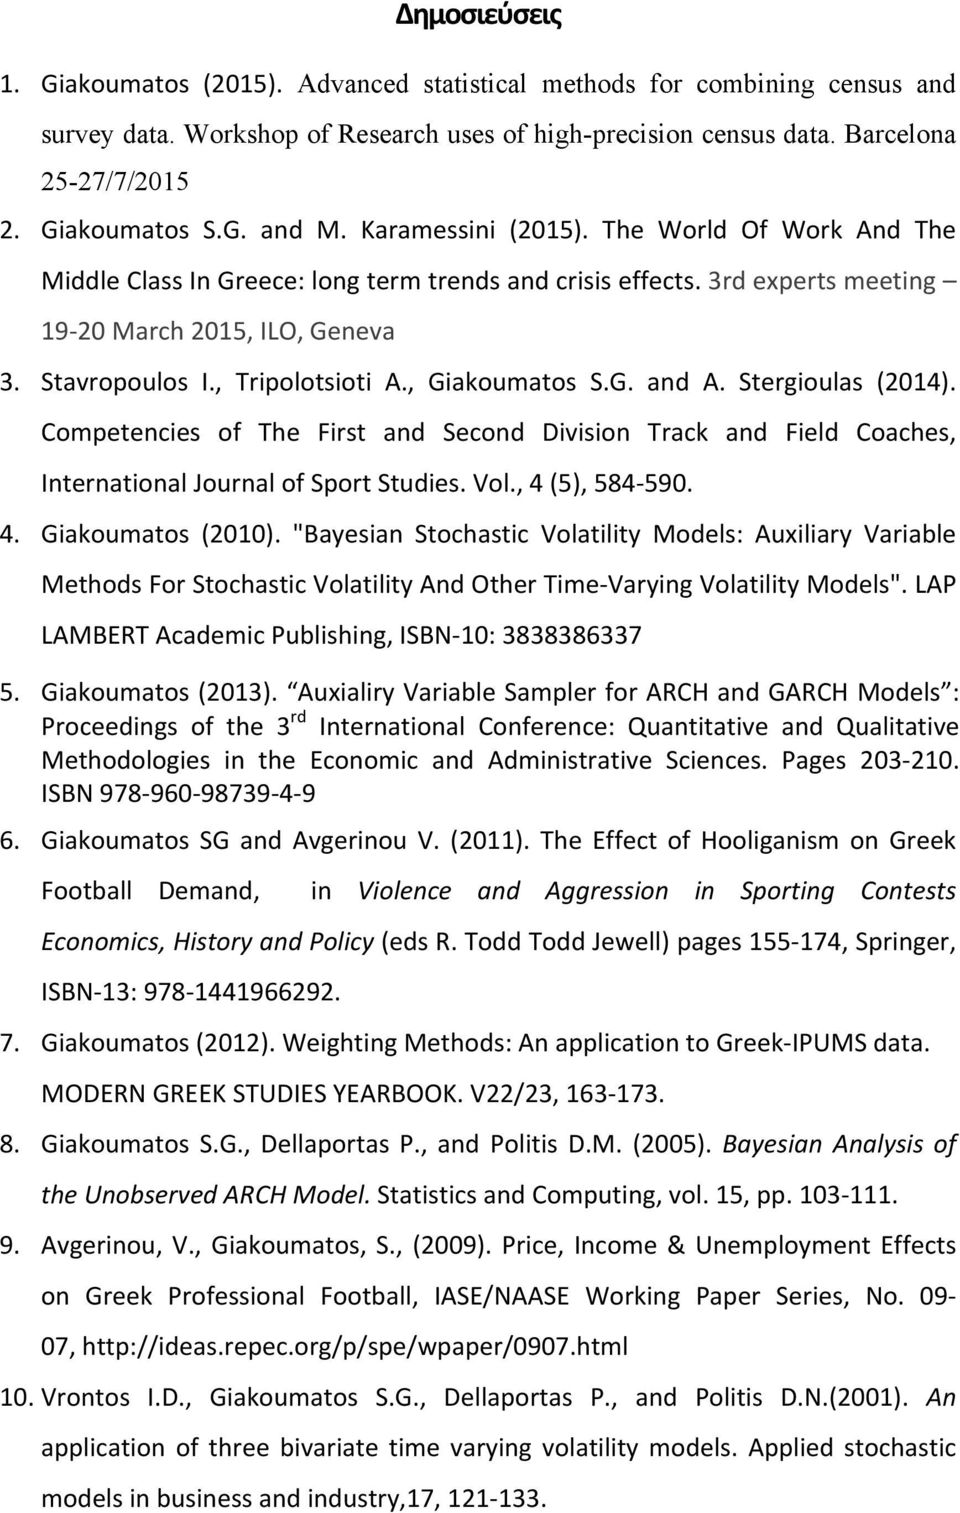 , Tripolotsioti A., Giakoumatos S.G. and A. Stergioulas (2014). Competencies of The First and Second Division Track and Field Coaches, International Journal of Sport Studies. Vol., 4 